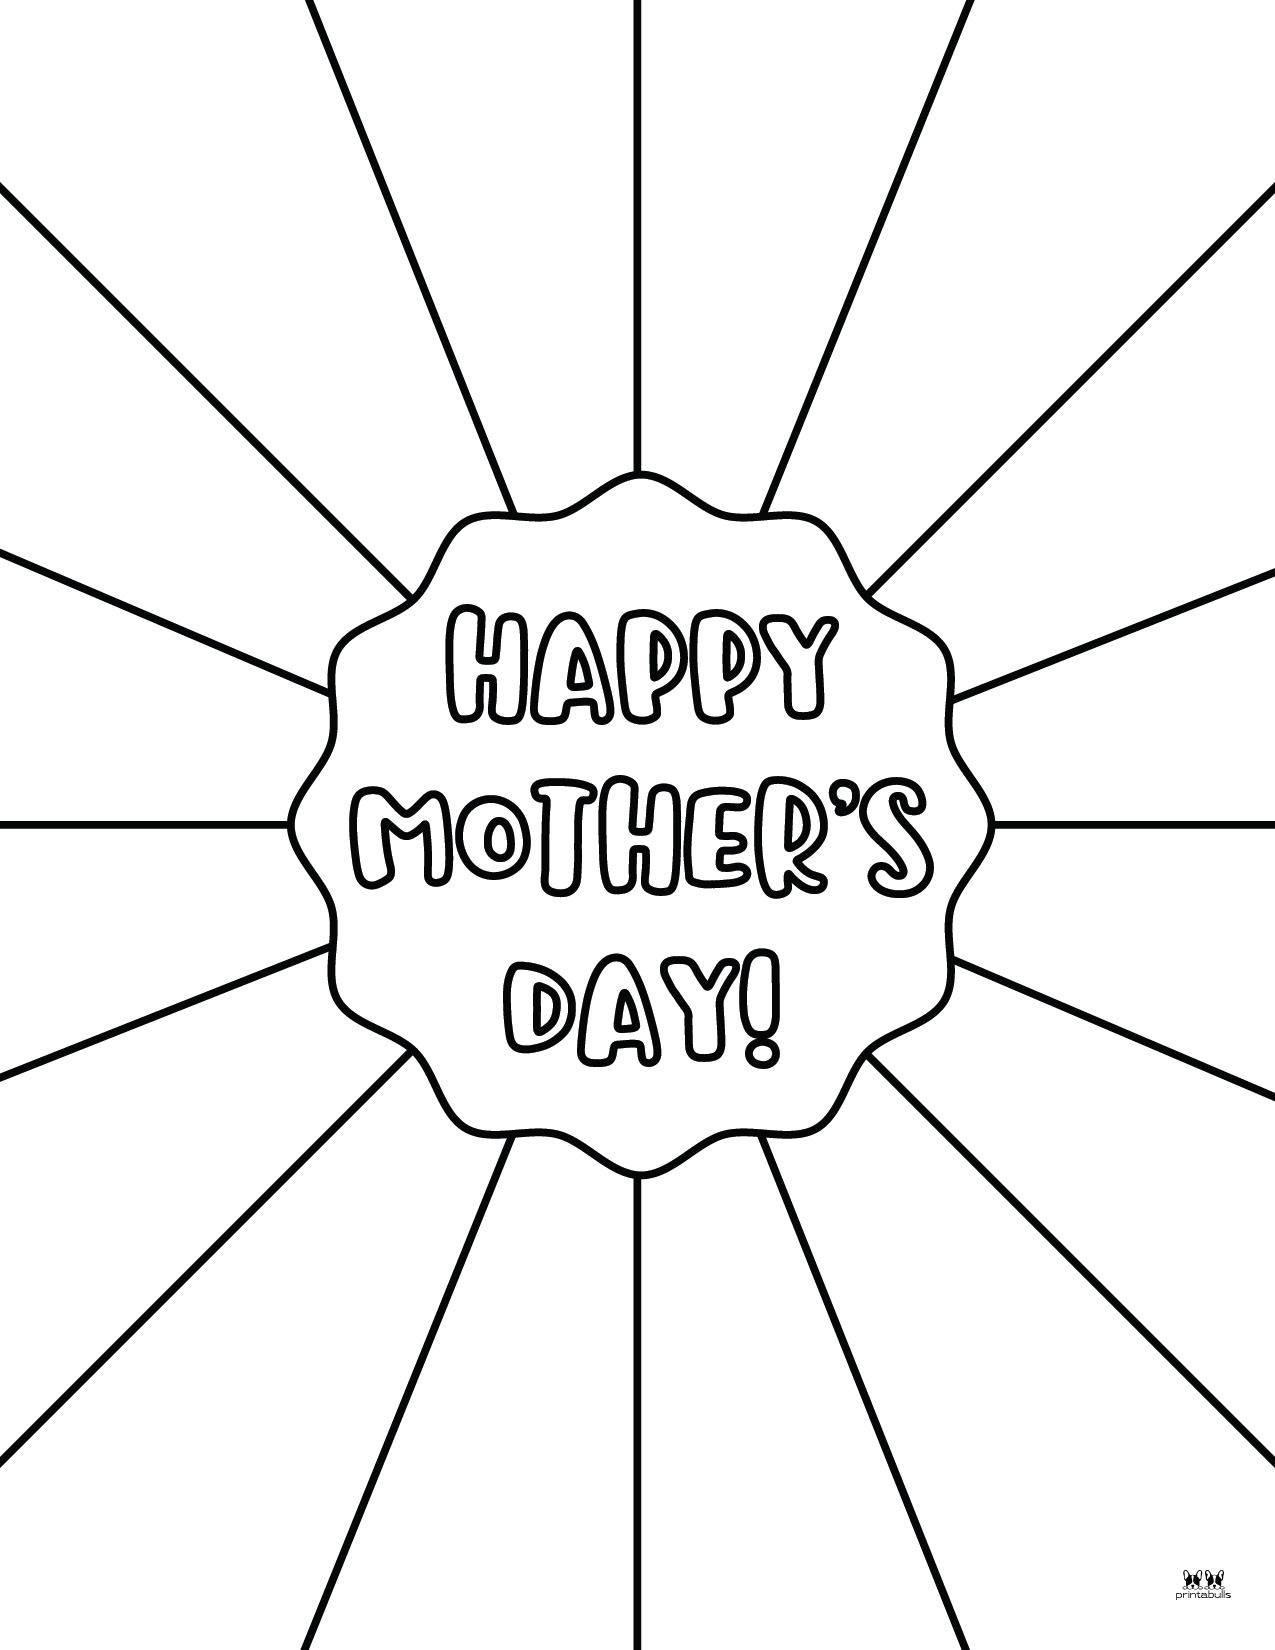 Mother's Day Coloring Pages - 50 FREE Printables | Printabulls